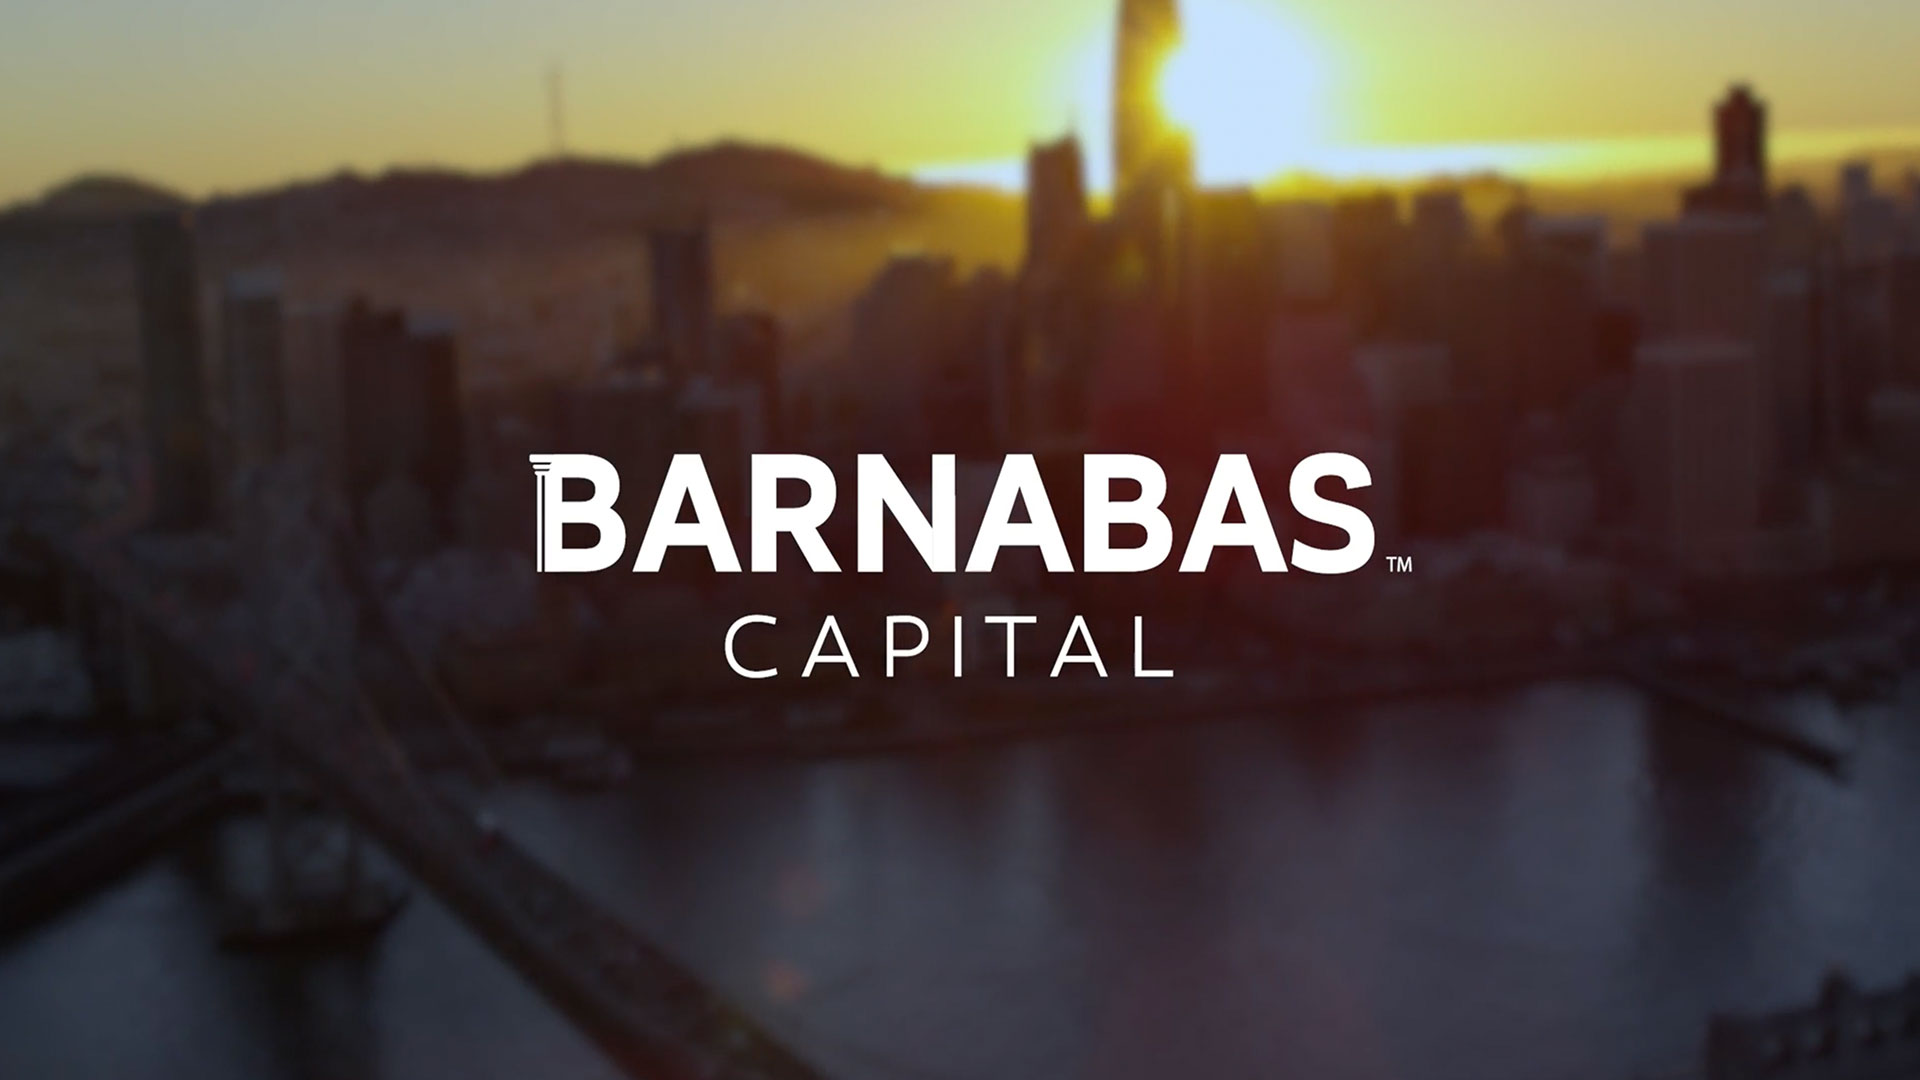 Barnabas Capital – A Corporate Story